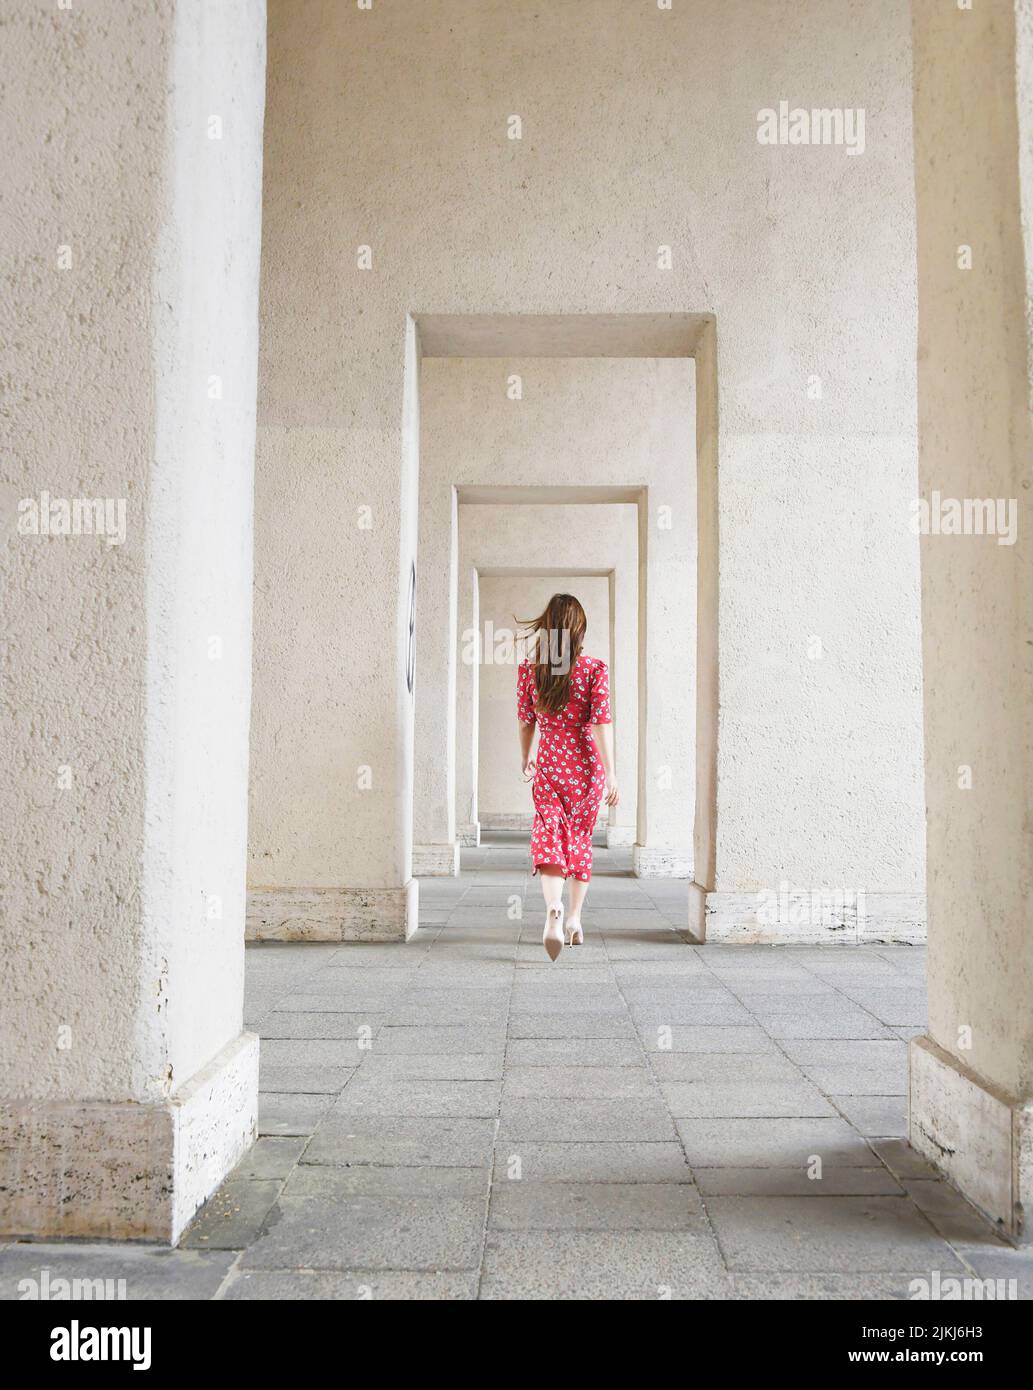 woman in red dress, portico, walking, from behind Stock Photo